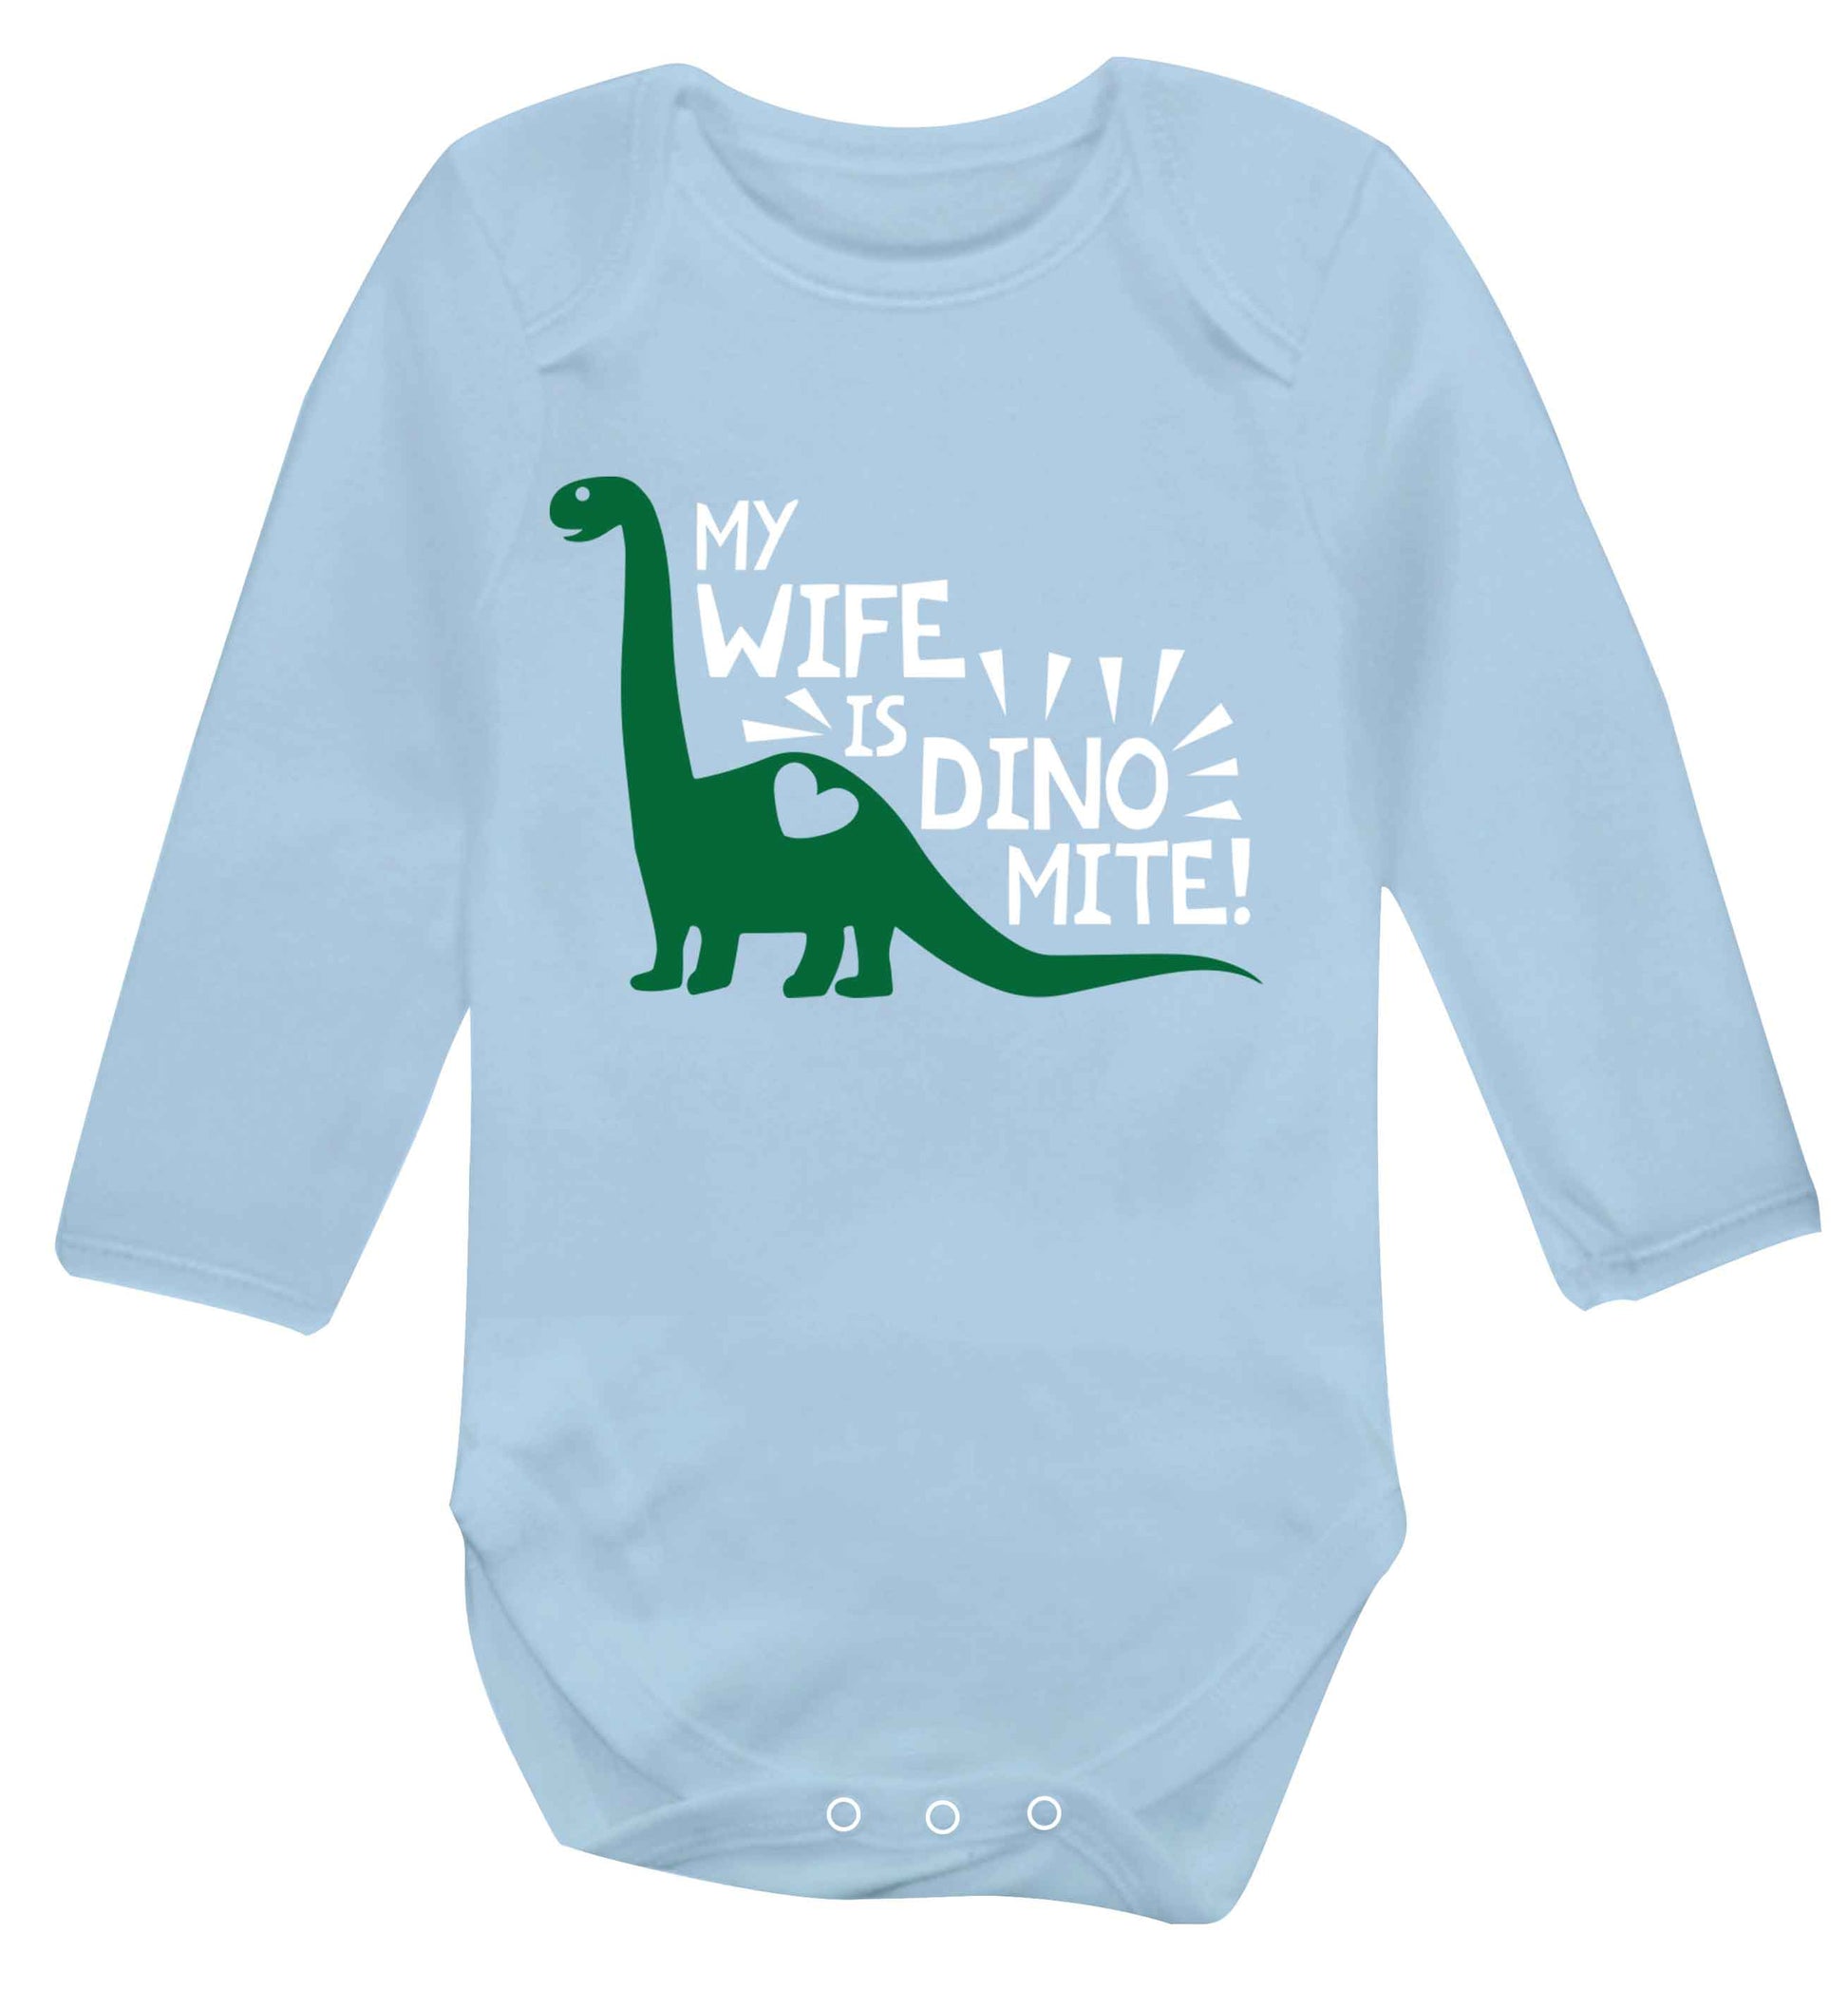 My wife is dinomite! Baby Vest long sleeved pale blue 6-12 months